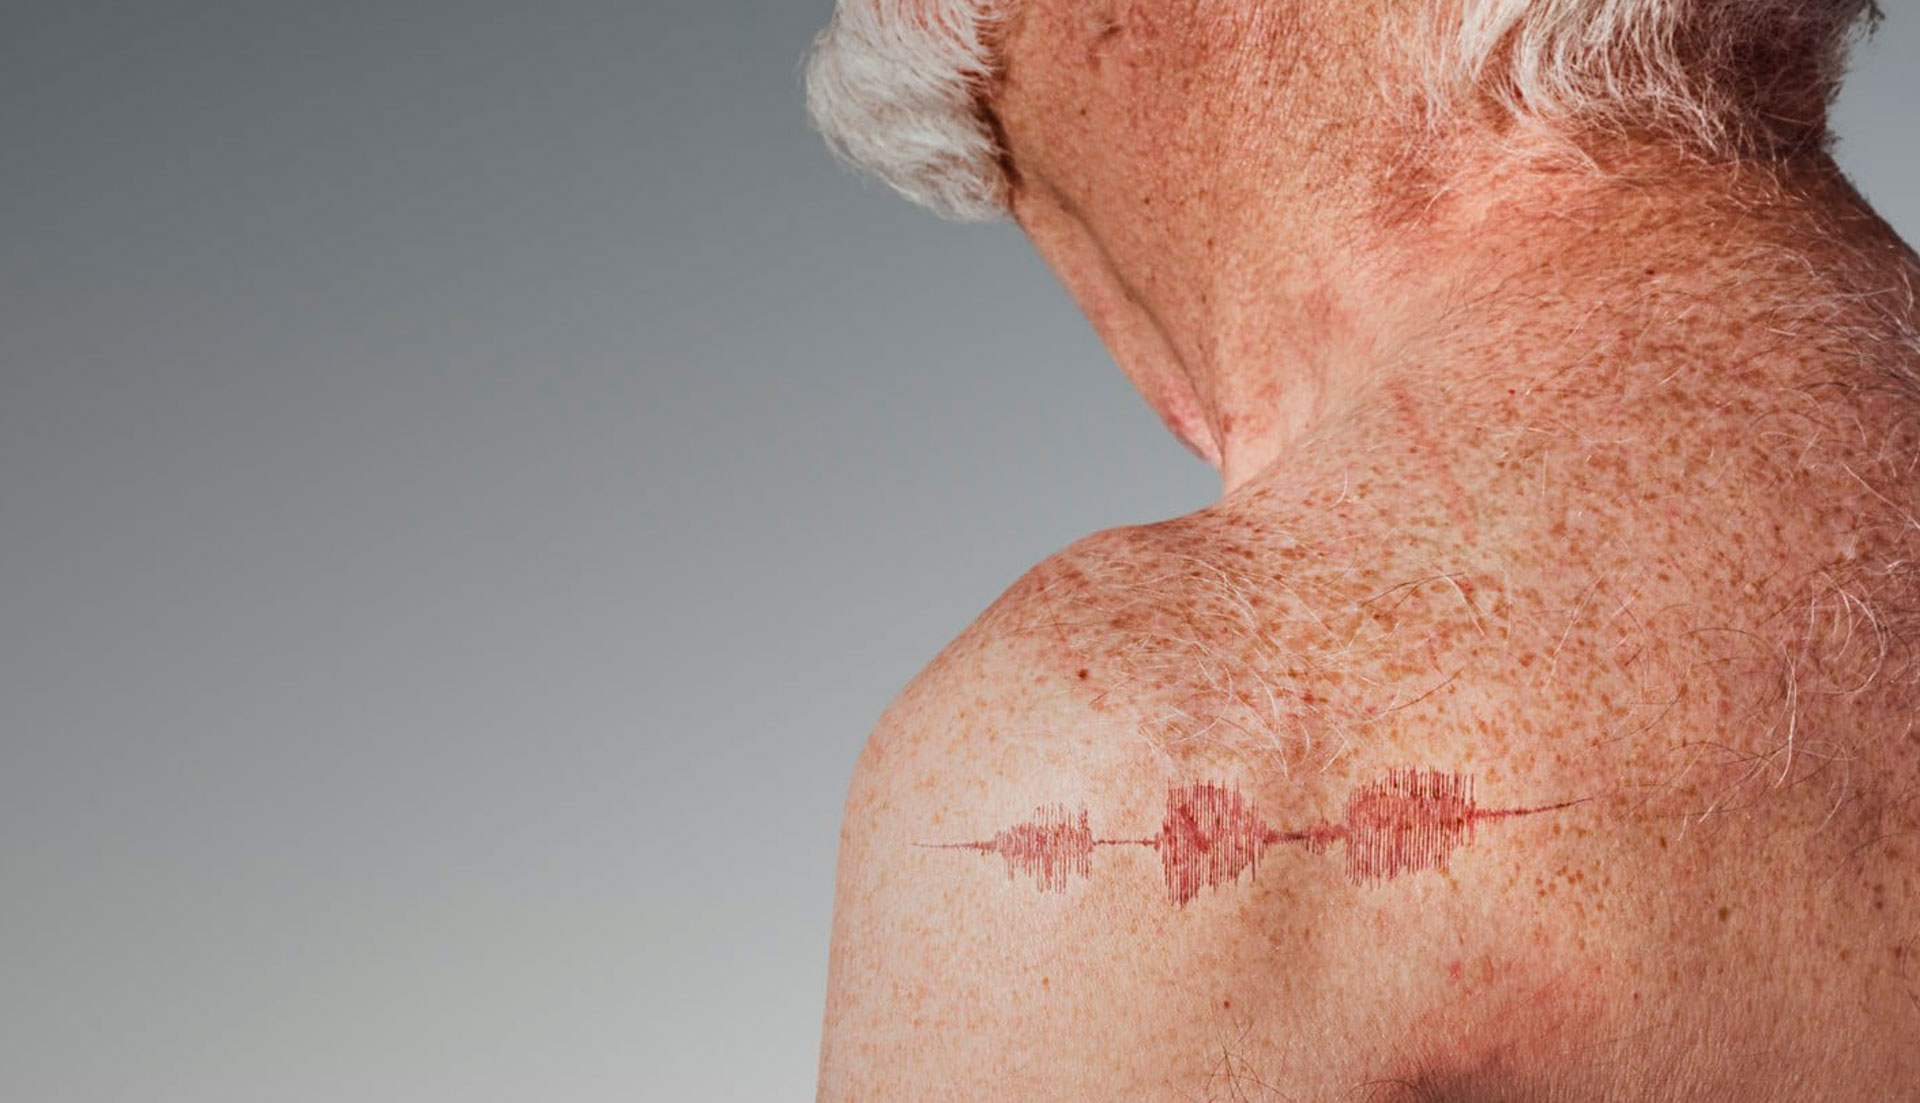 An older man, shirtless, facing away with a graphical representation of itchy skin on his back.